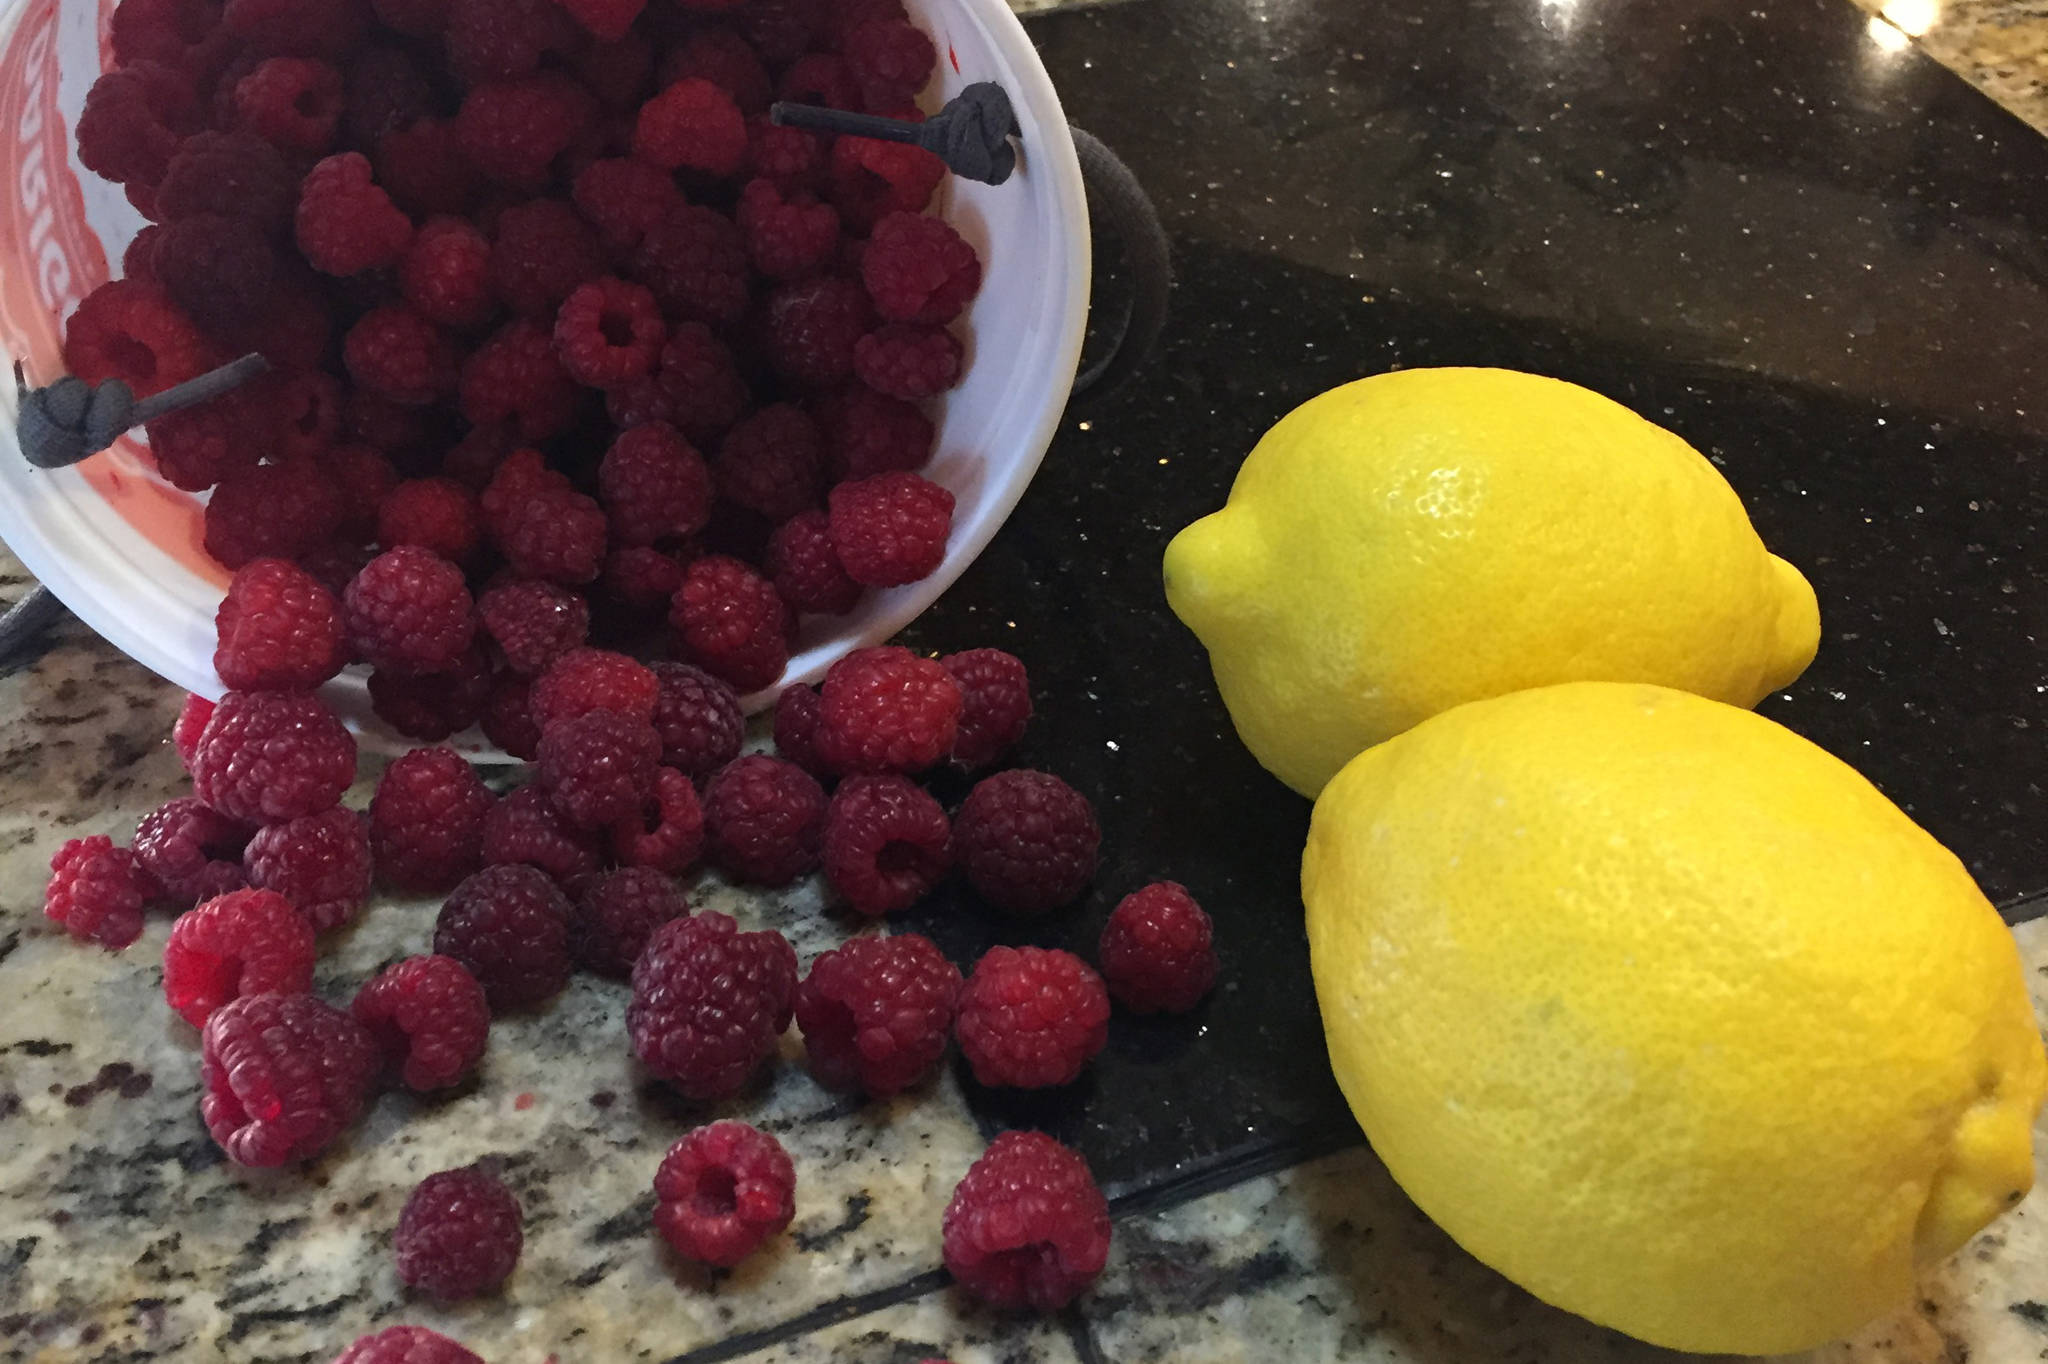 Lemon adds something special to berry recipes. (Photo by Teri Robl)